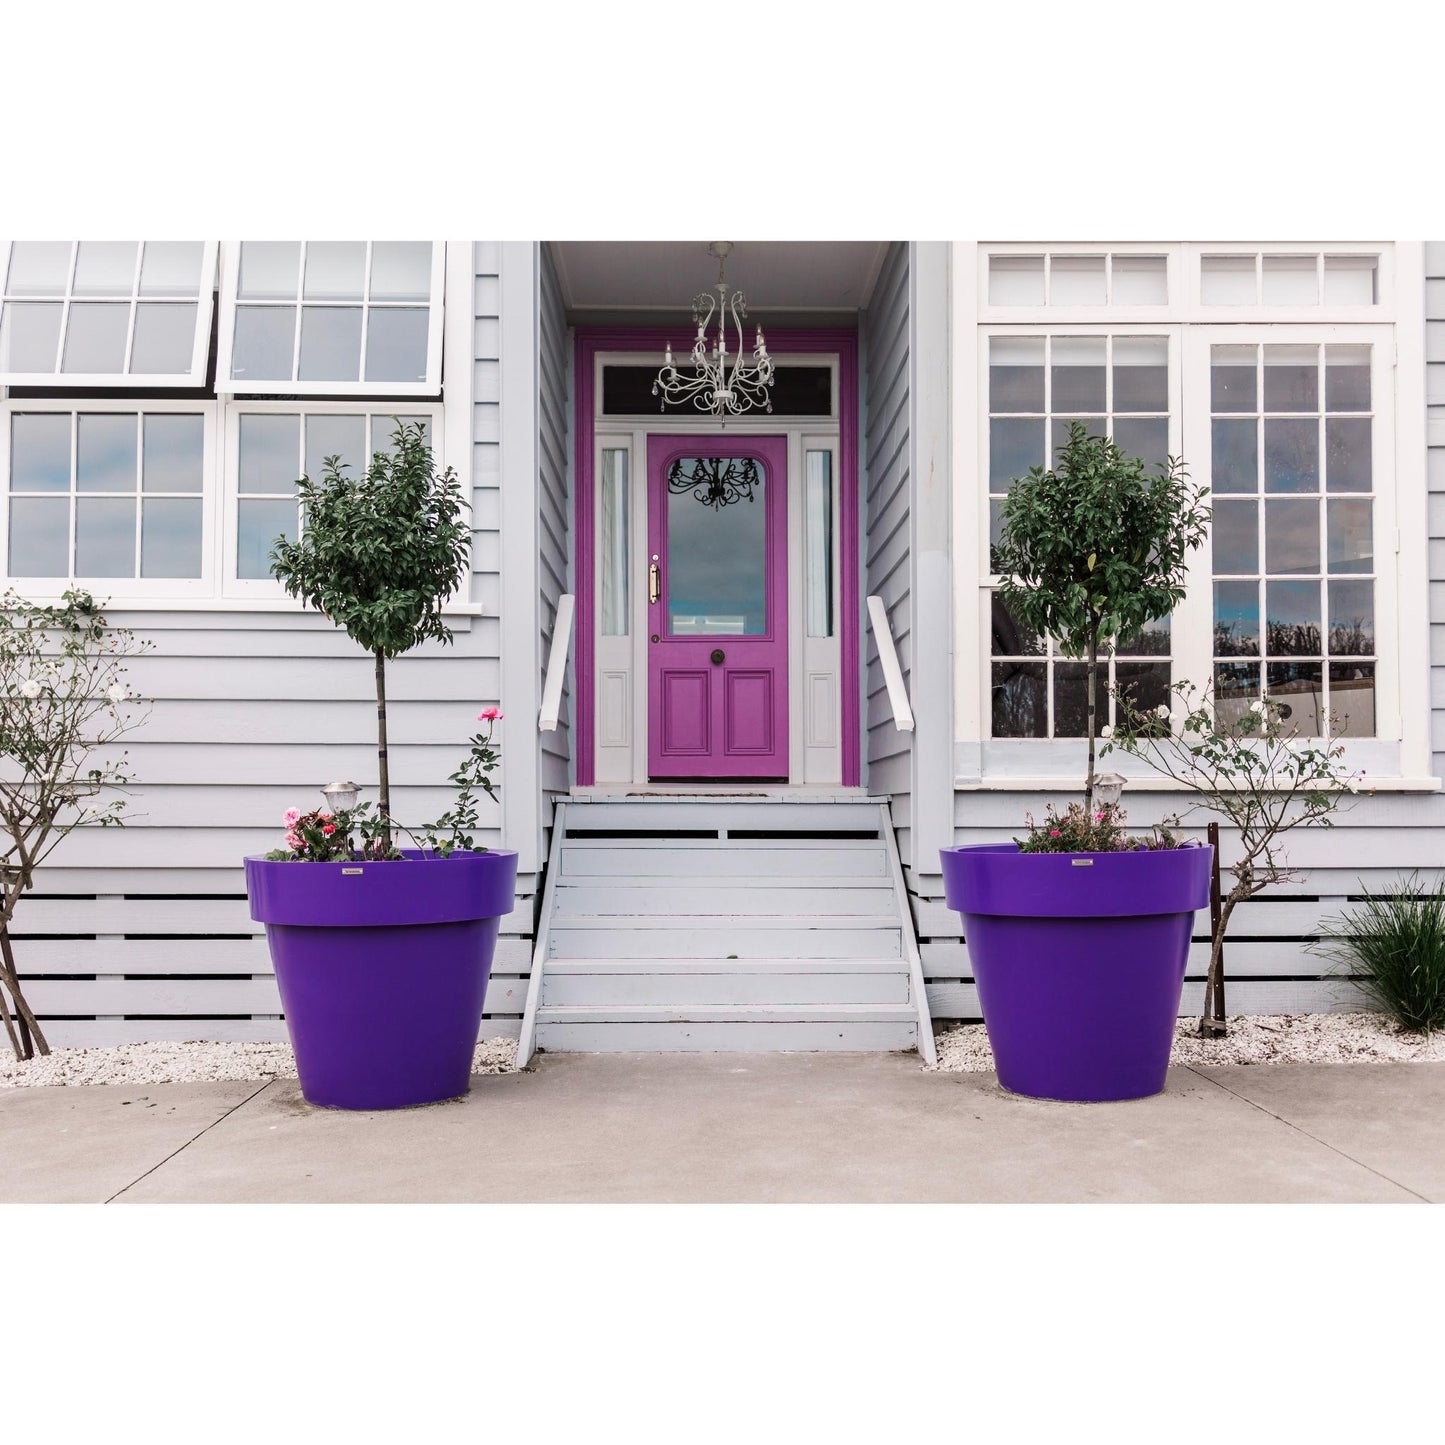 Large purple planter pots with laurels panted in them. They are at the front entrance of a house.